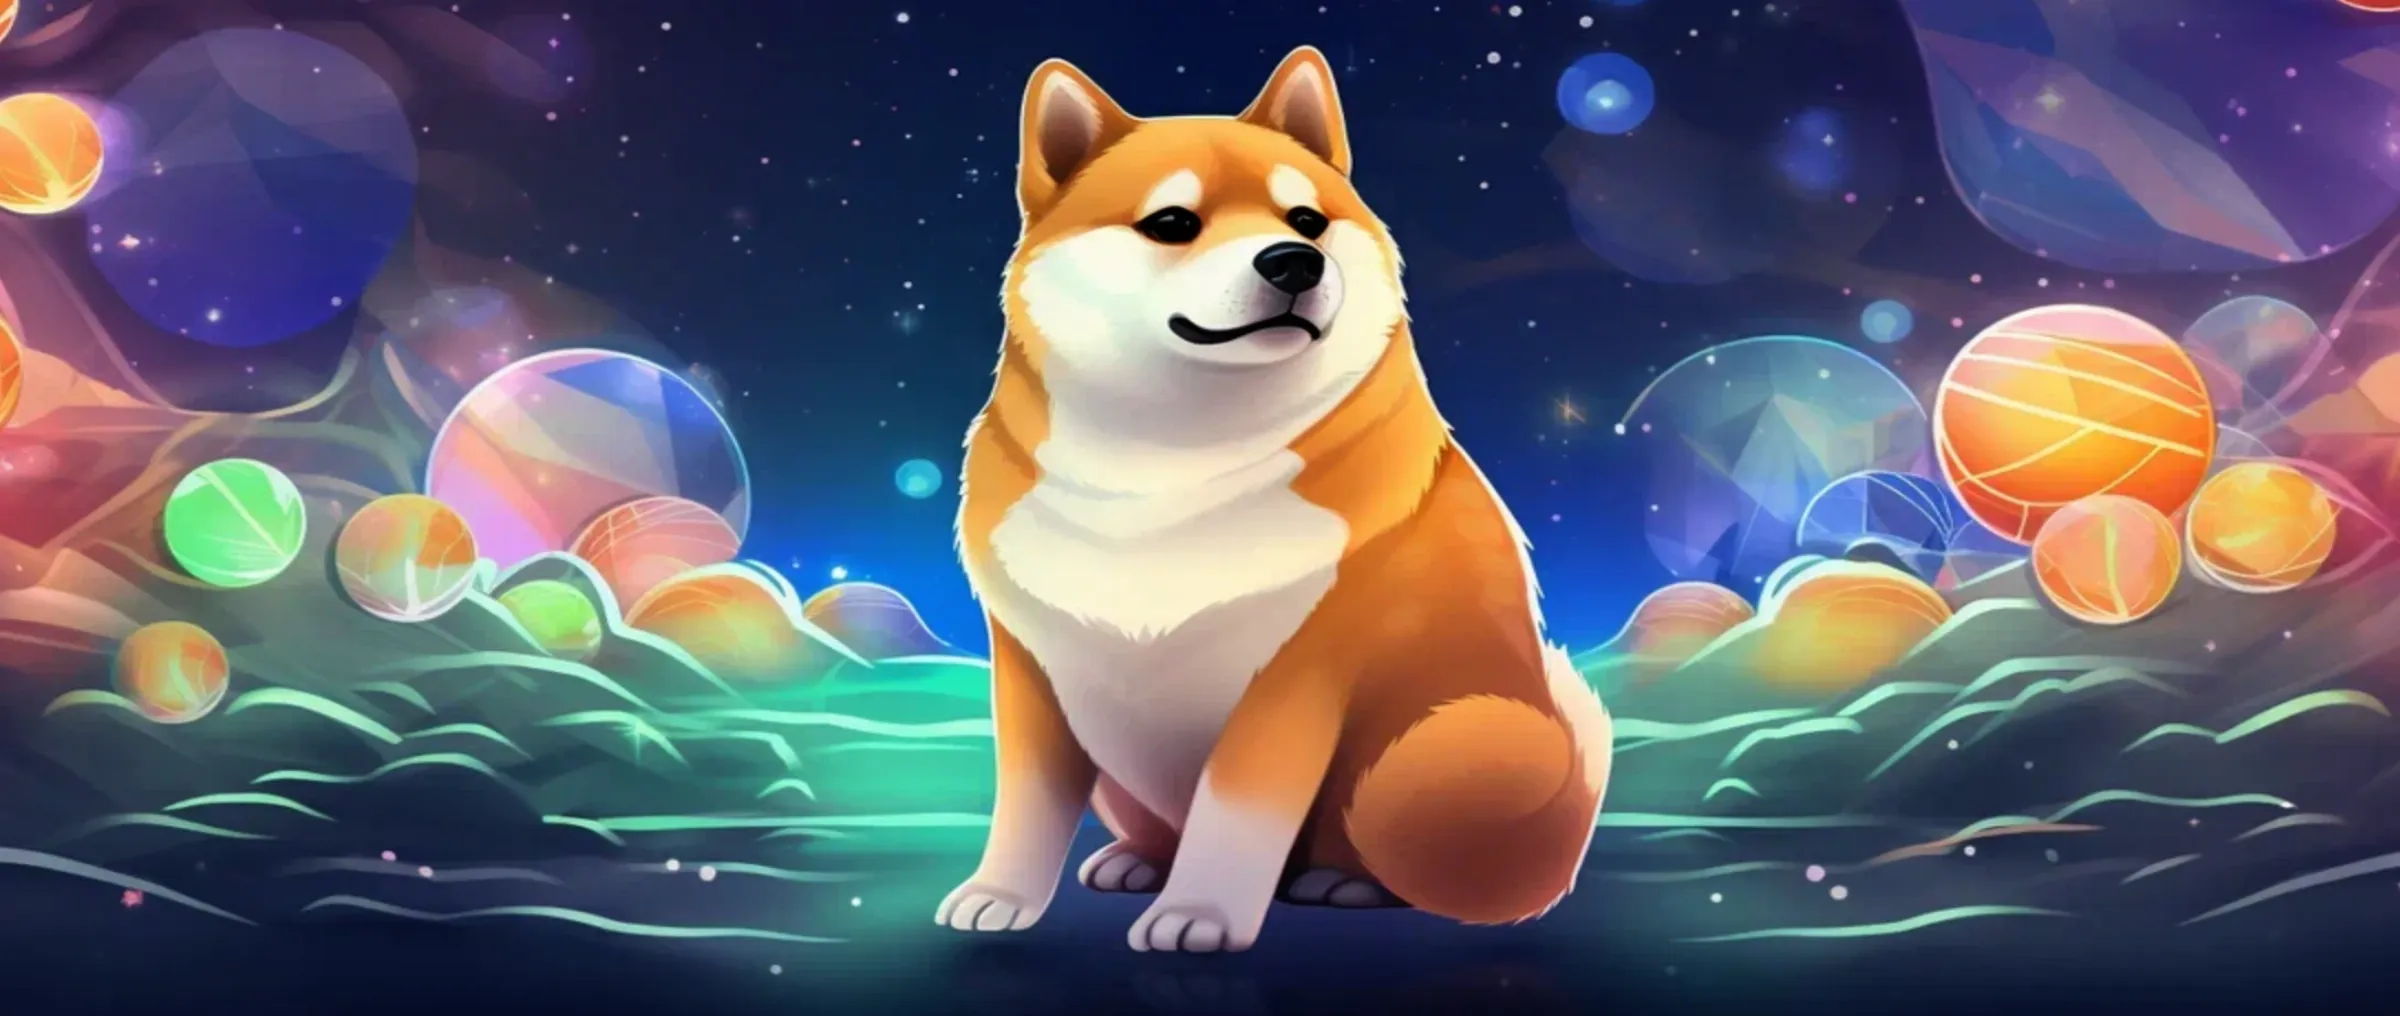 Analyst Ali Martinez predicts that the price of Dogecoin could rise to between $1.7 and $3.5